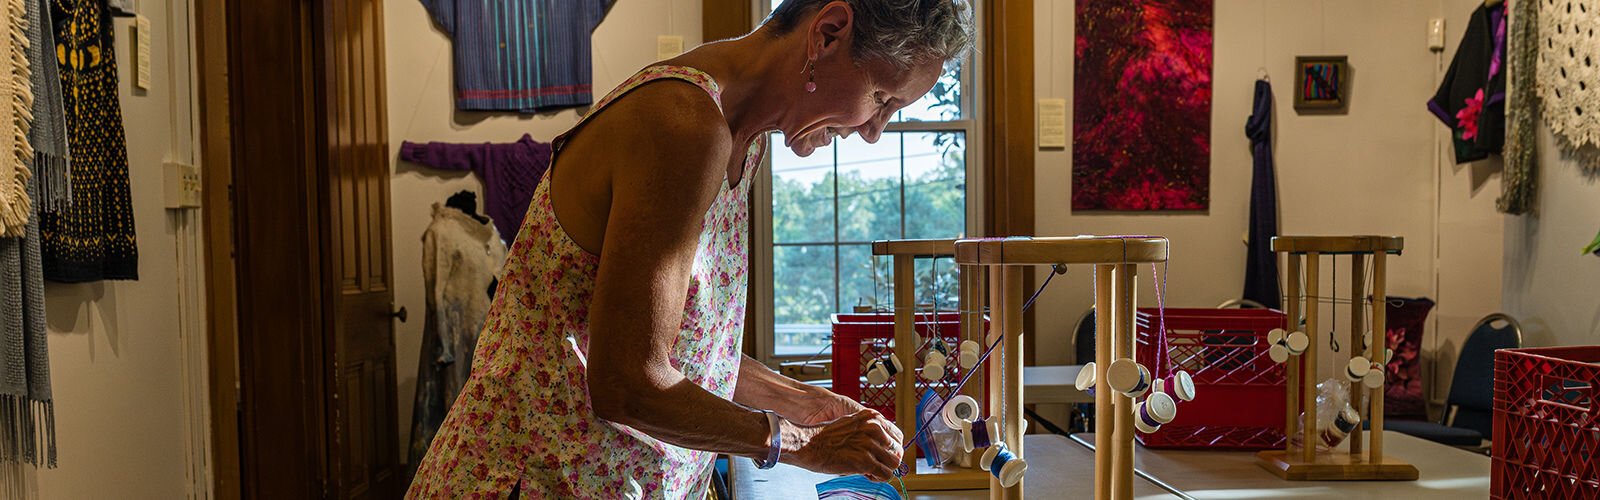 Guild member and frequent instructor, Janie Yates, is working on the Maru Dai, a round-top braiding stand used to make a wide variety of kumihimo braids in many different forms.